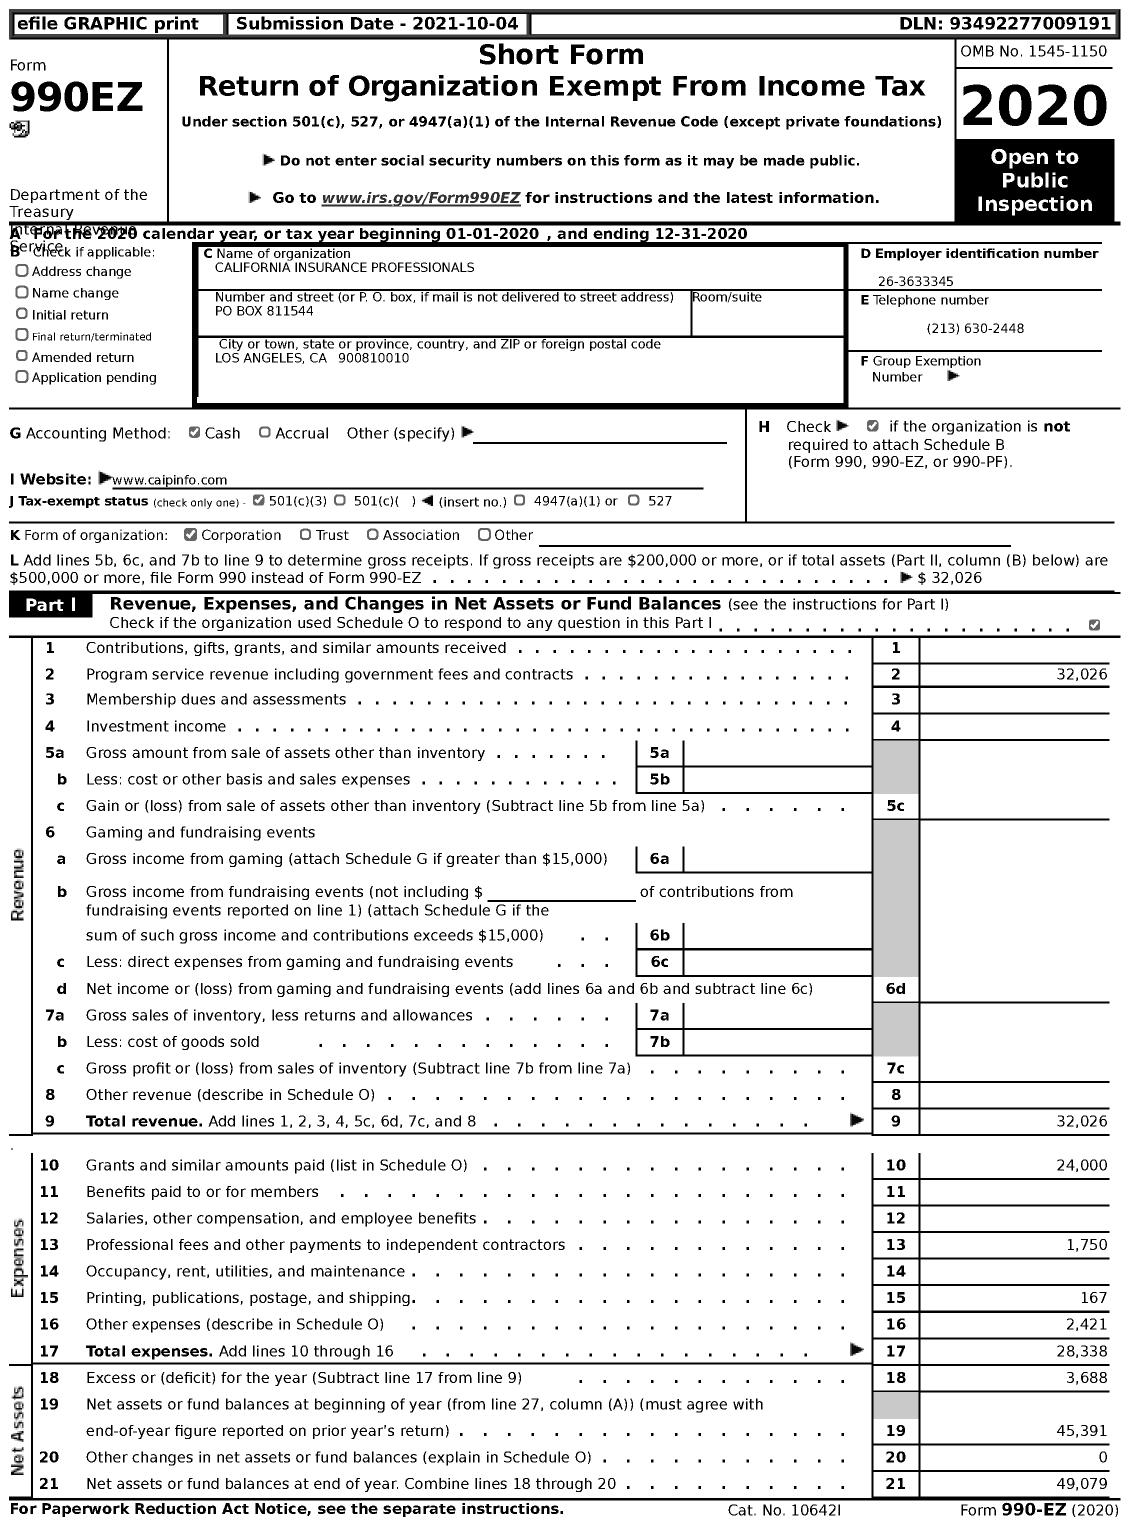 Image of first page of 2020 Form 990EZ for California Insurance Professionals (CAIP)